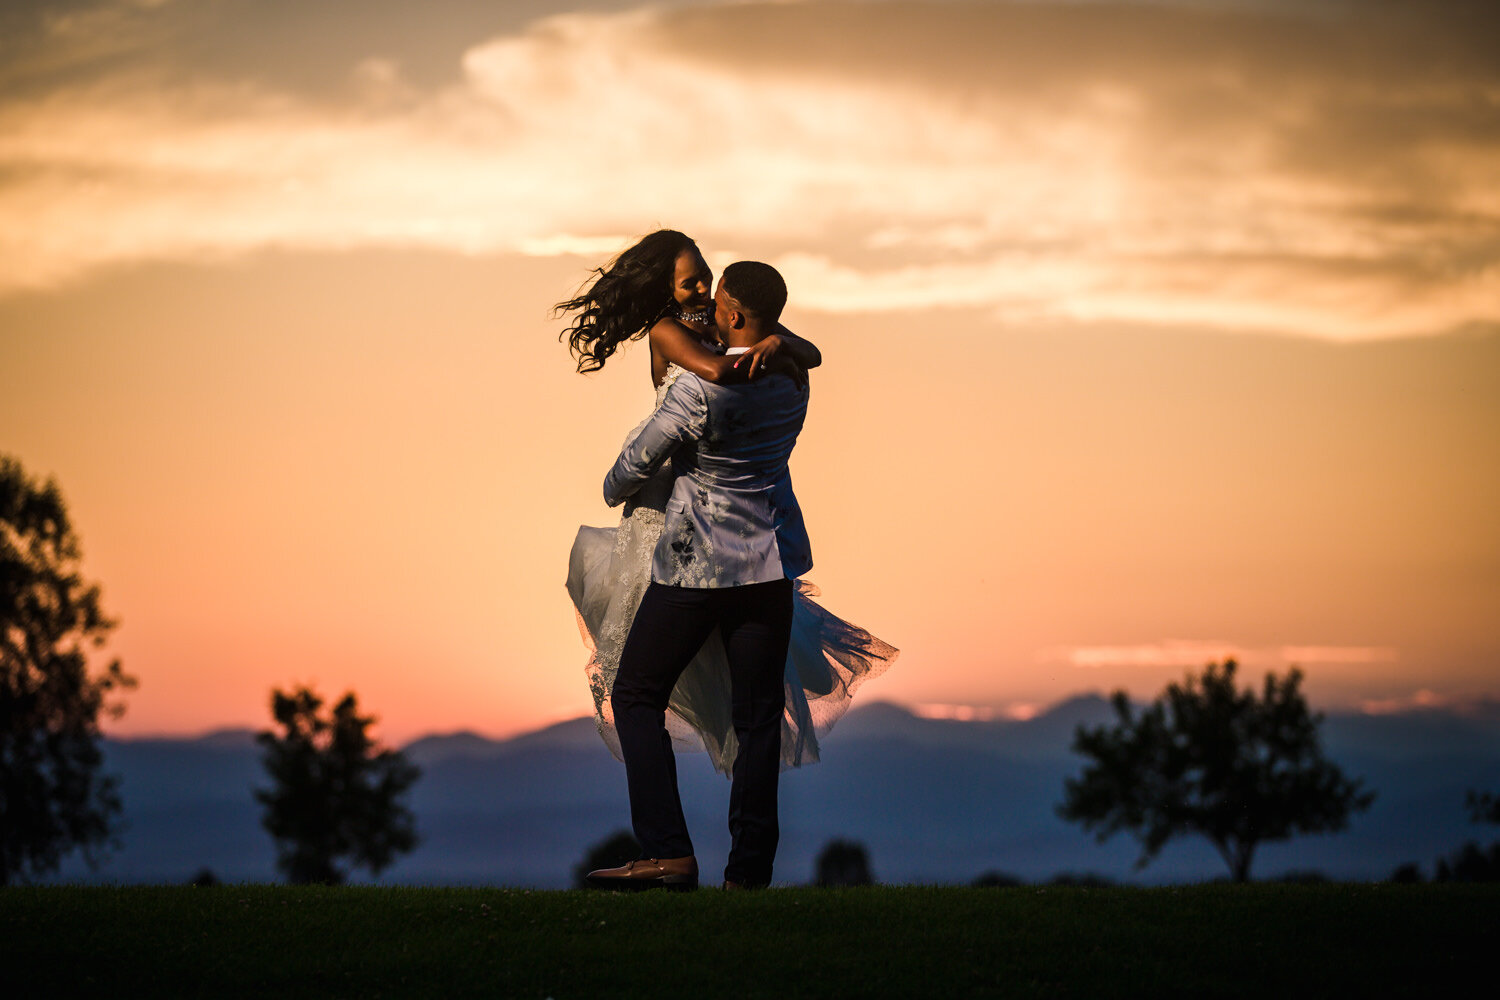  Rich and Paige's Wedding at Saddleback Golf Course in Firestone, Colorado
© JMGant Photography
http://www.jmgantphotography.com/ 